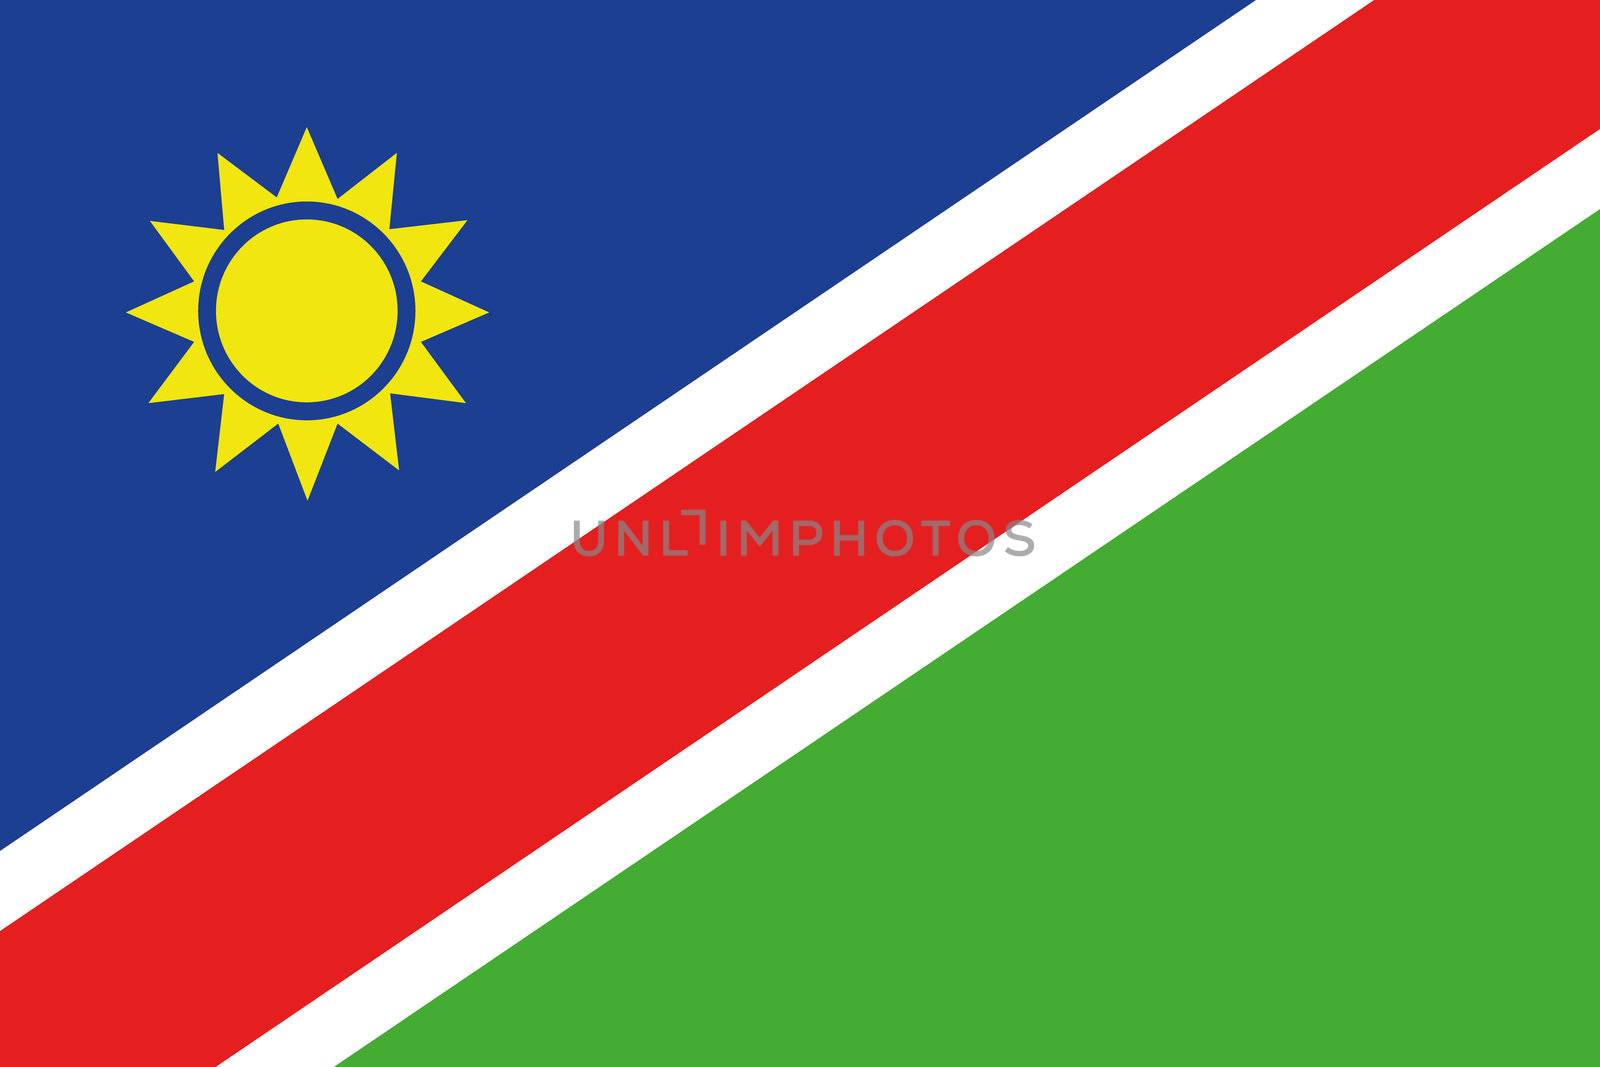 An illustration of the flag of Namibia